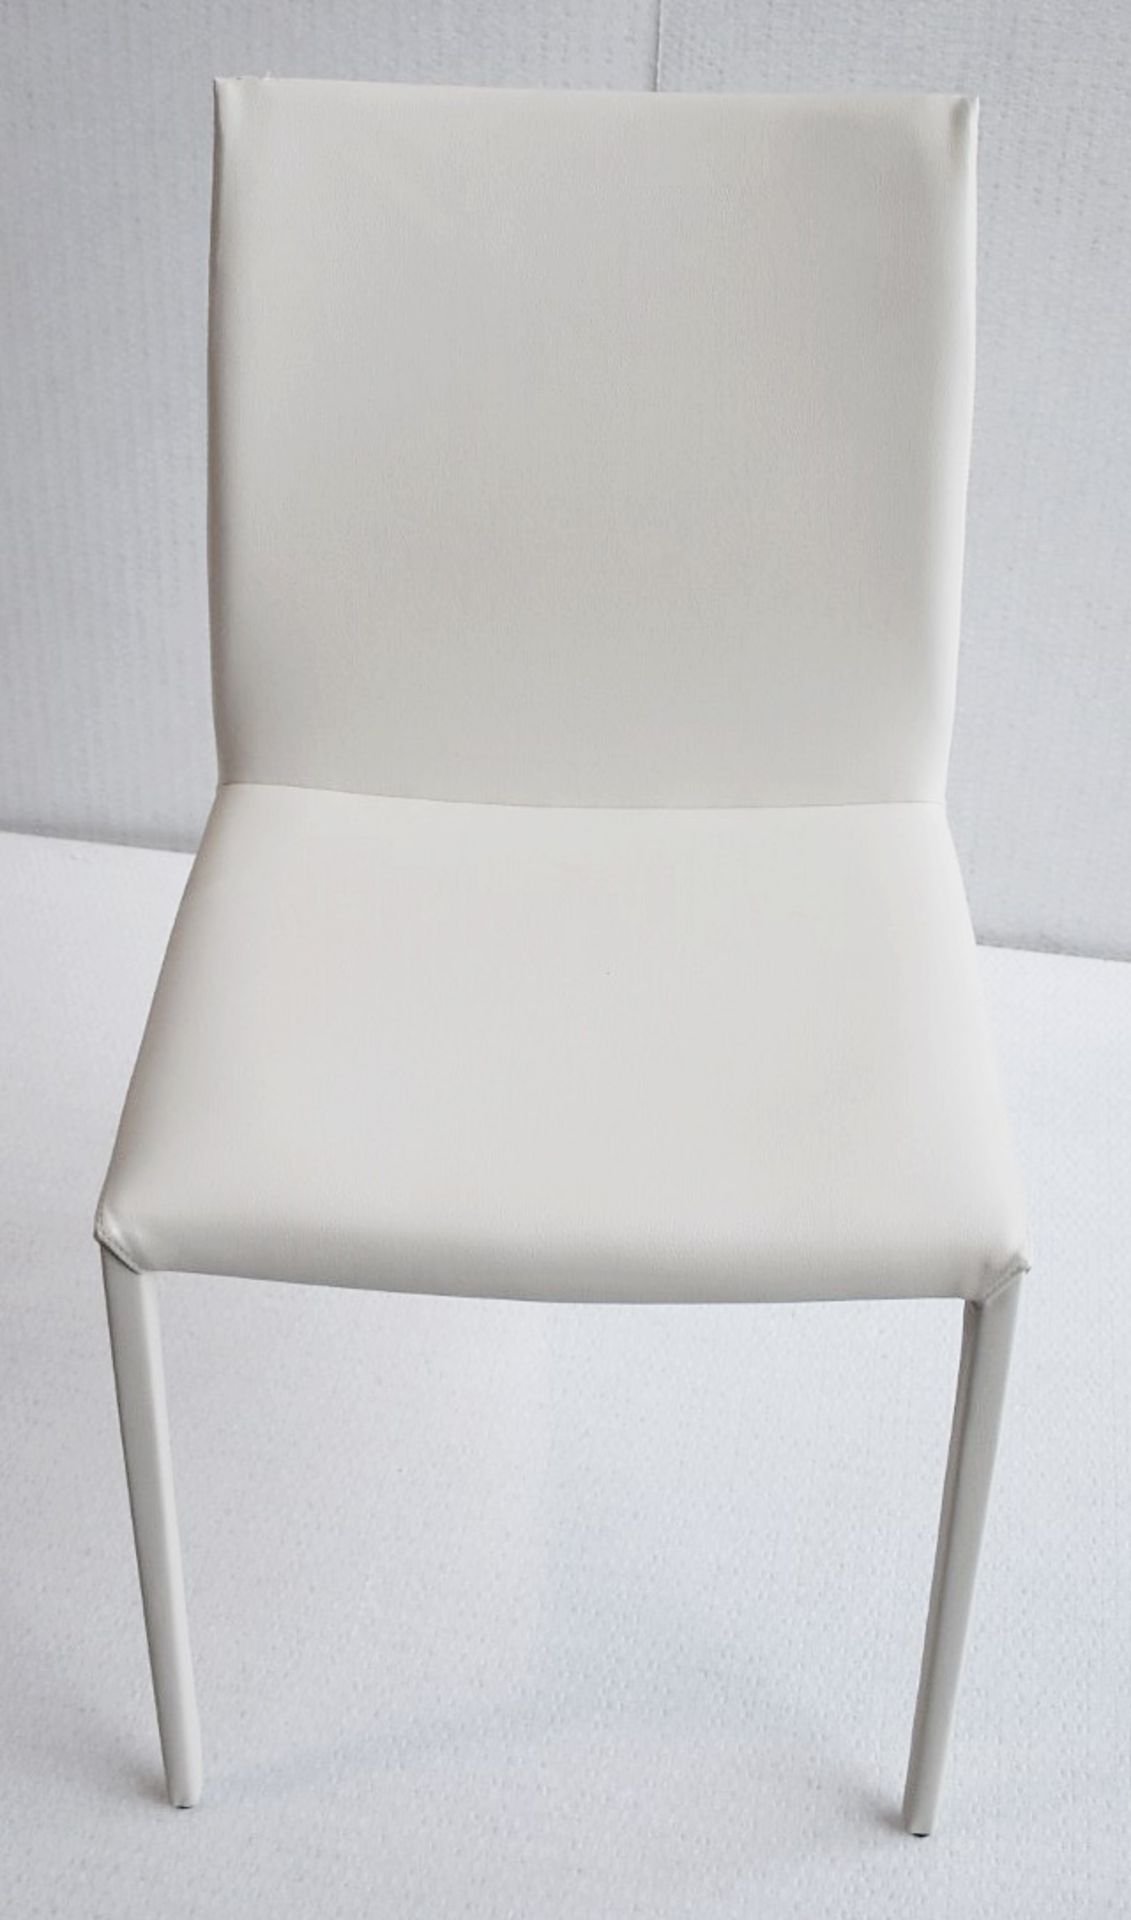 1 x CATTELAN ITALIA 'Norma' Designer Fully Upholstered Chair in a Pale Premium Leather - Image 9 of 9